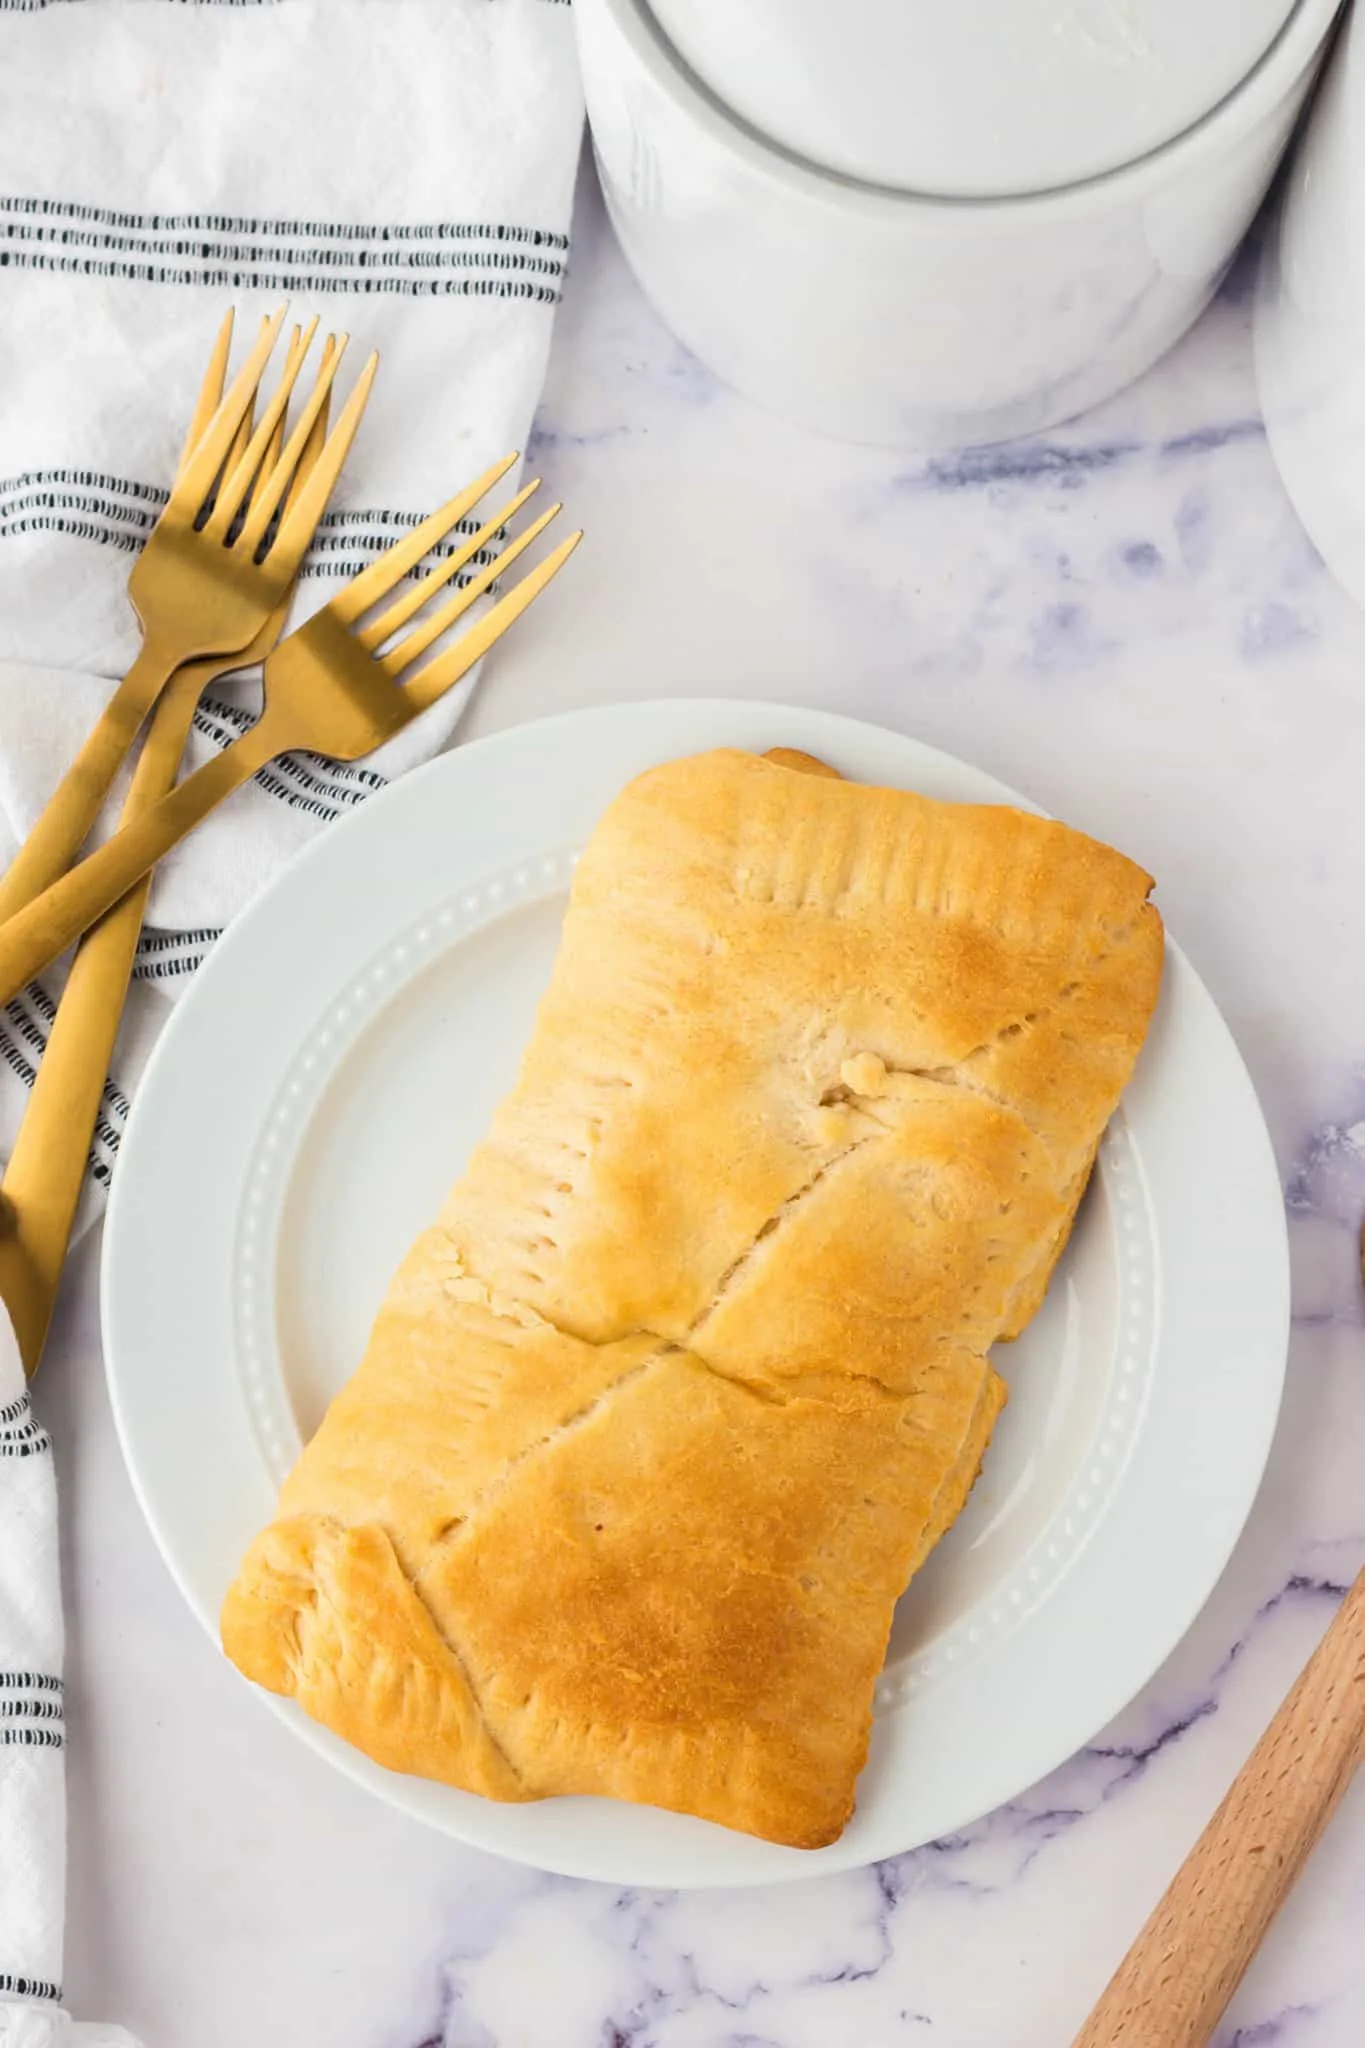 Ham and Cheese Hot Pockets are a kid friendly lunch or dinner recipe using Pillsbury crescent rolls, American cheese slices and chopped ham slices.